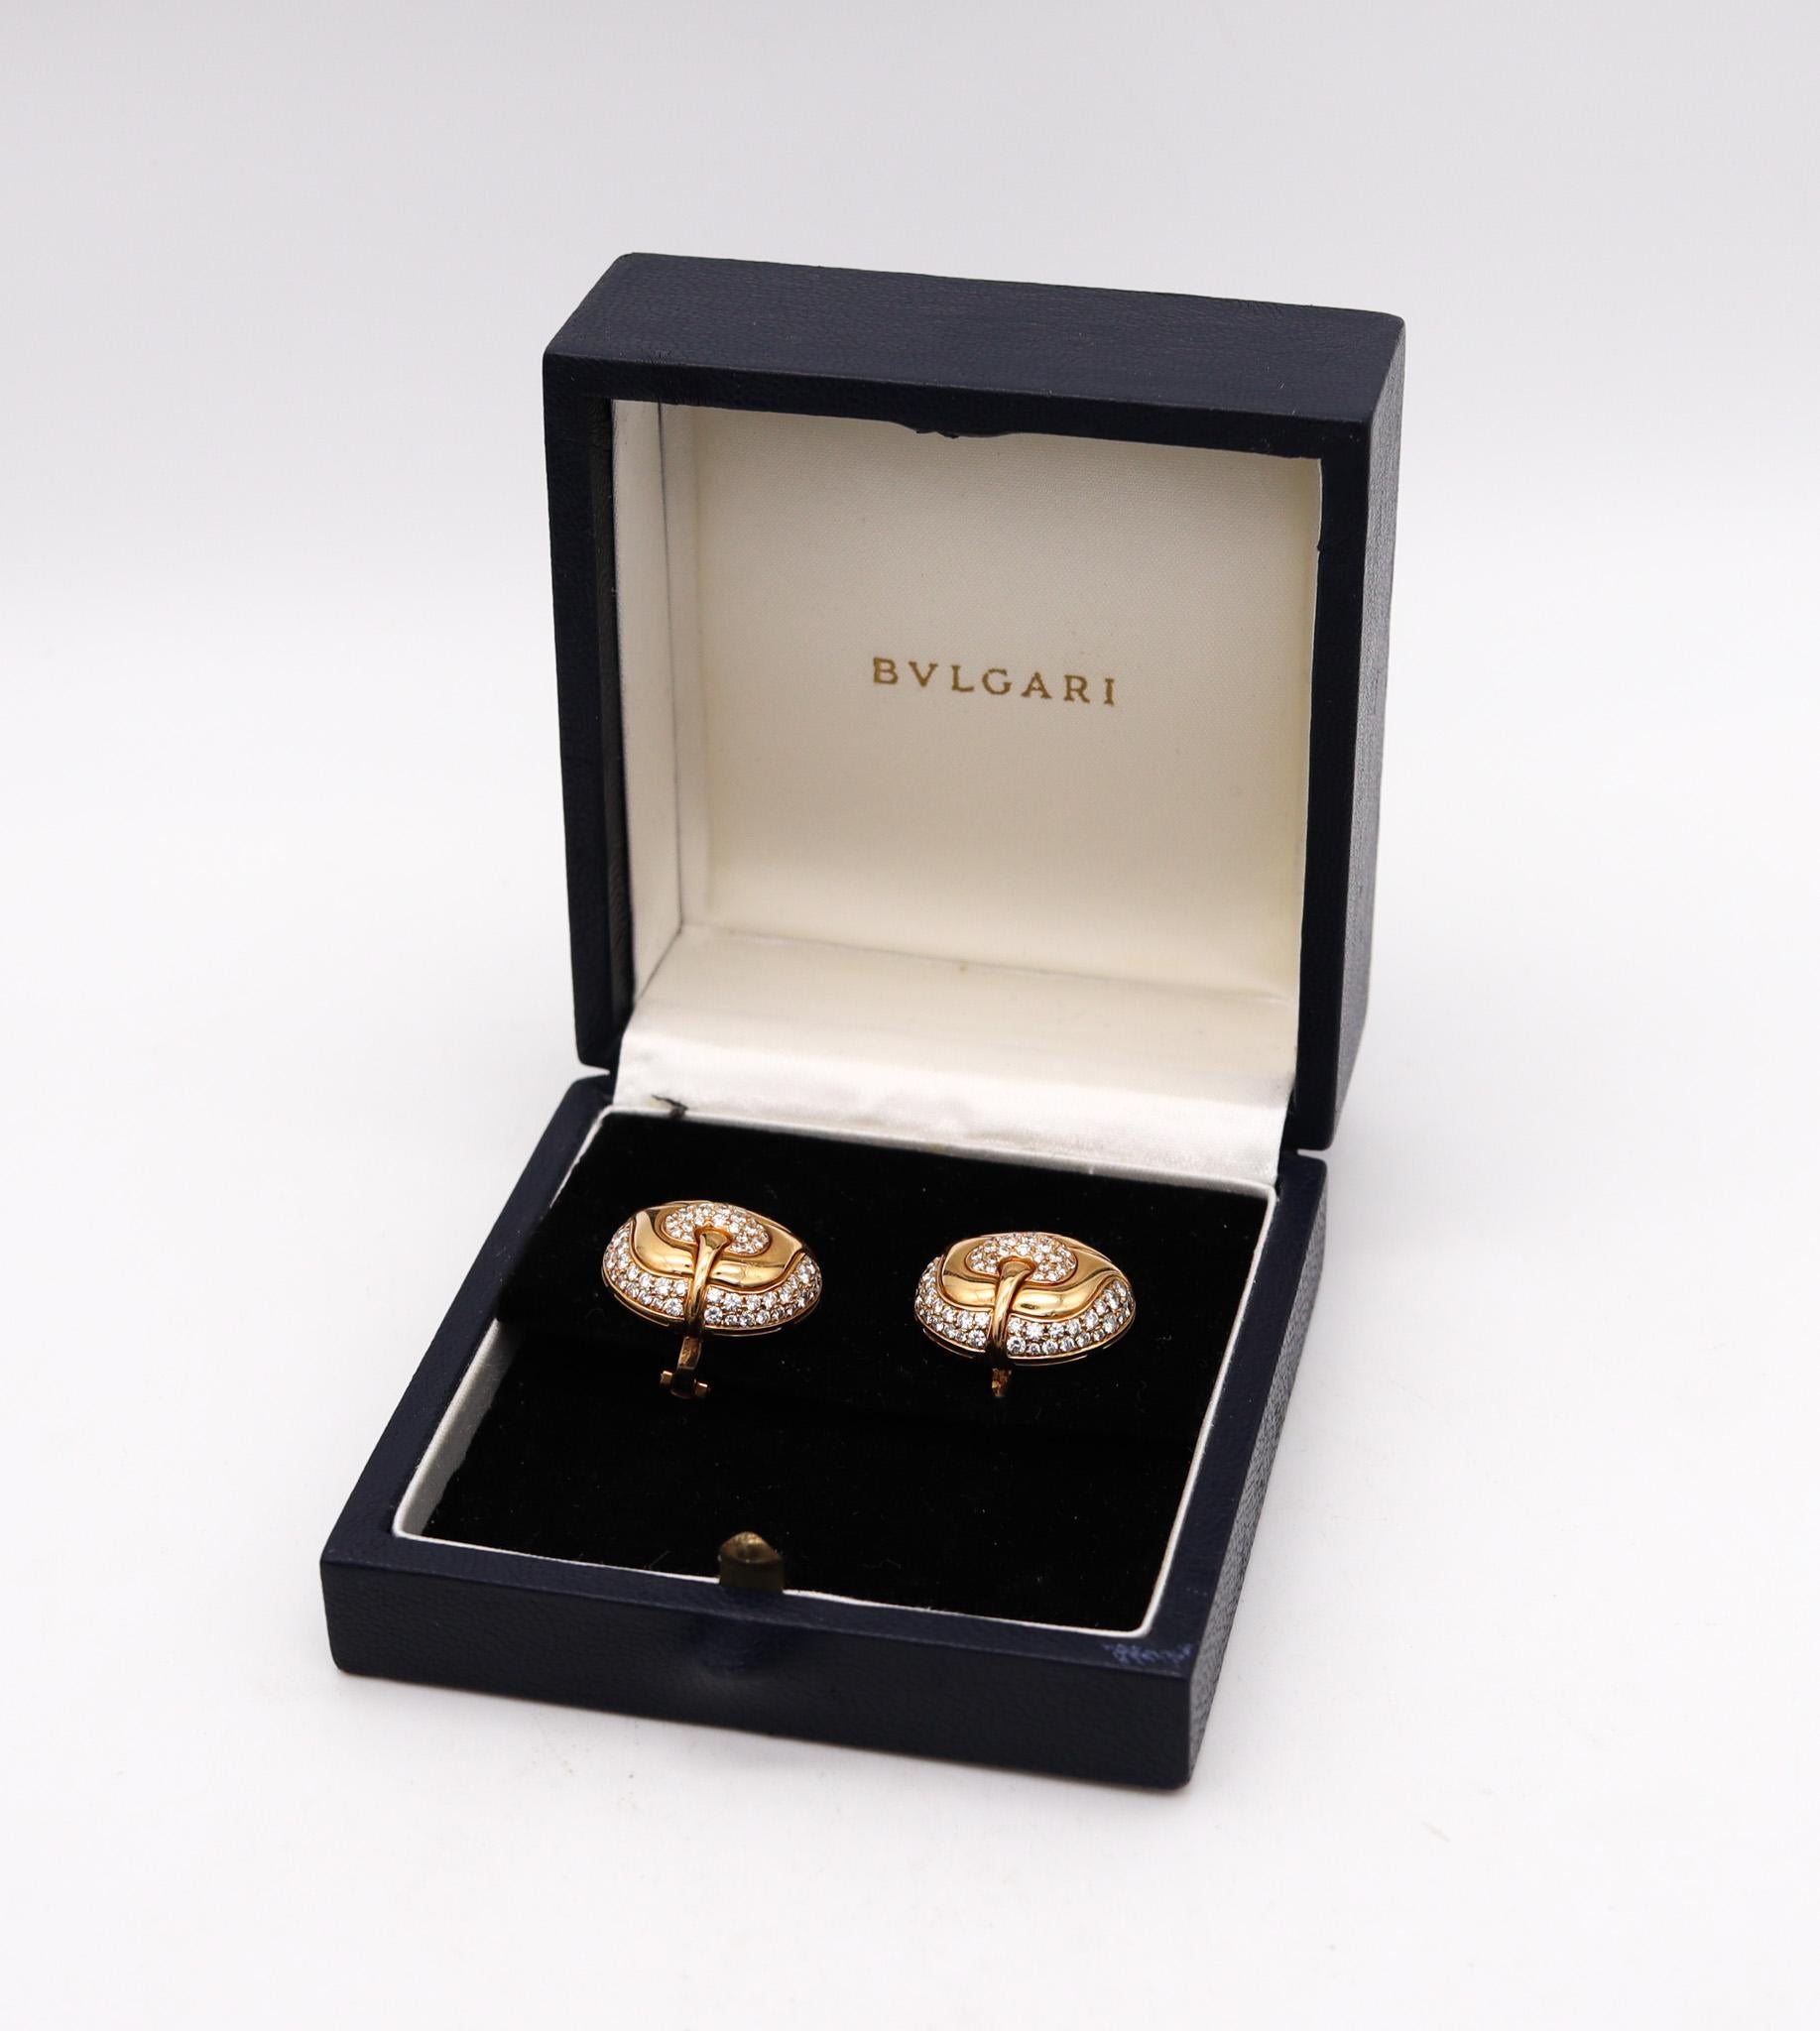 Pair of diamonds Earrings designed by Bvlgari.

Beautiful pair of contemporary earrings, created in Rome Italy by the iconic jewelry house of Bvlgari. These great pair of clips-on earrings has been carefully crafted as a left and right with a bombe